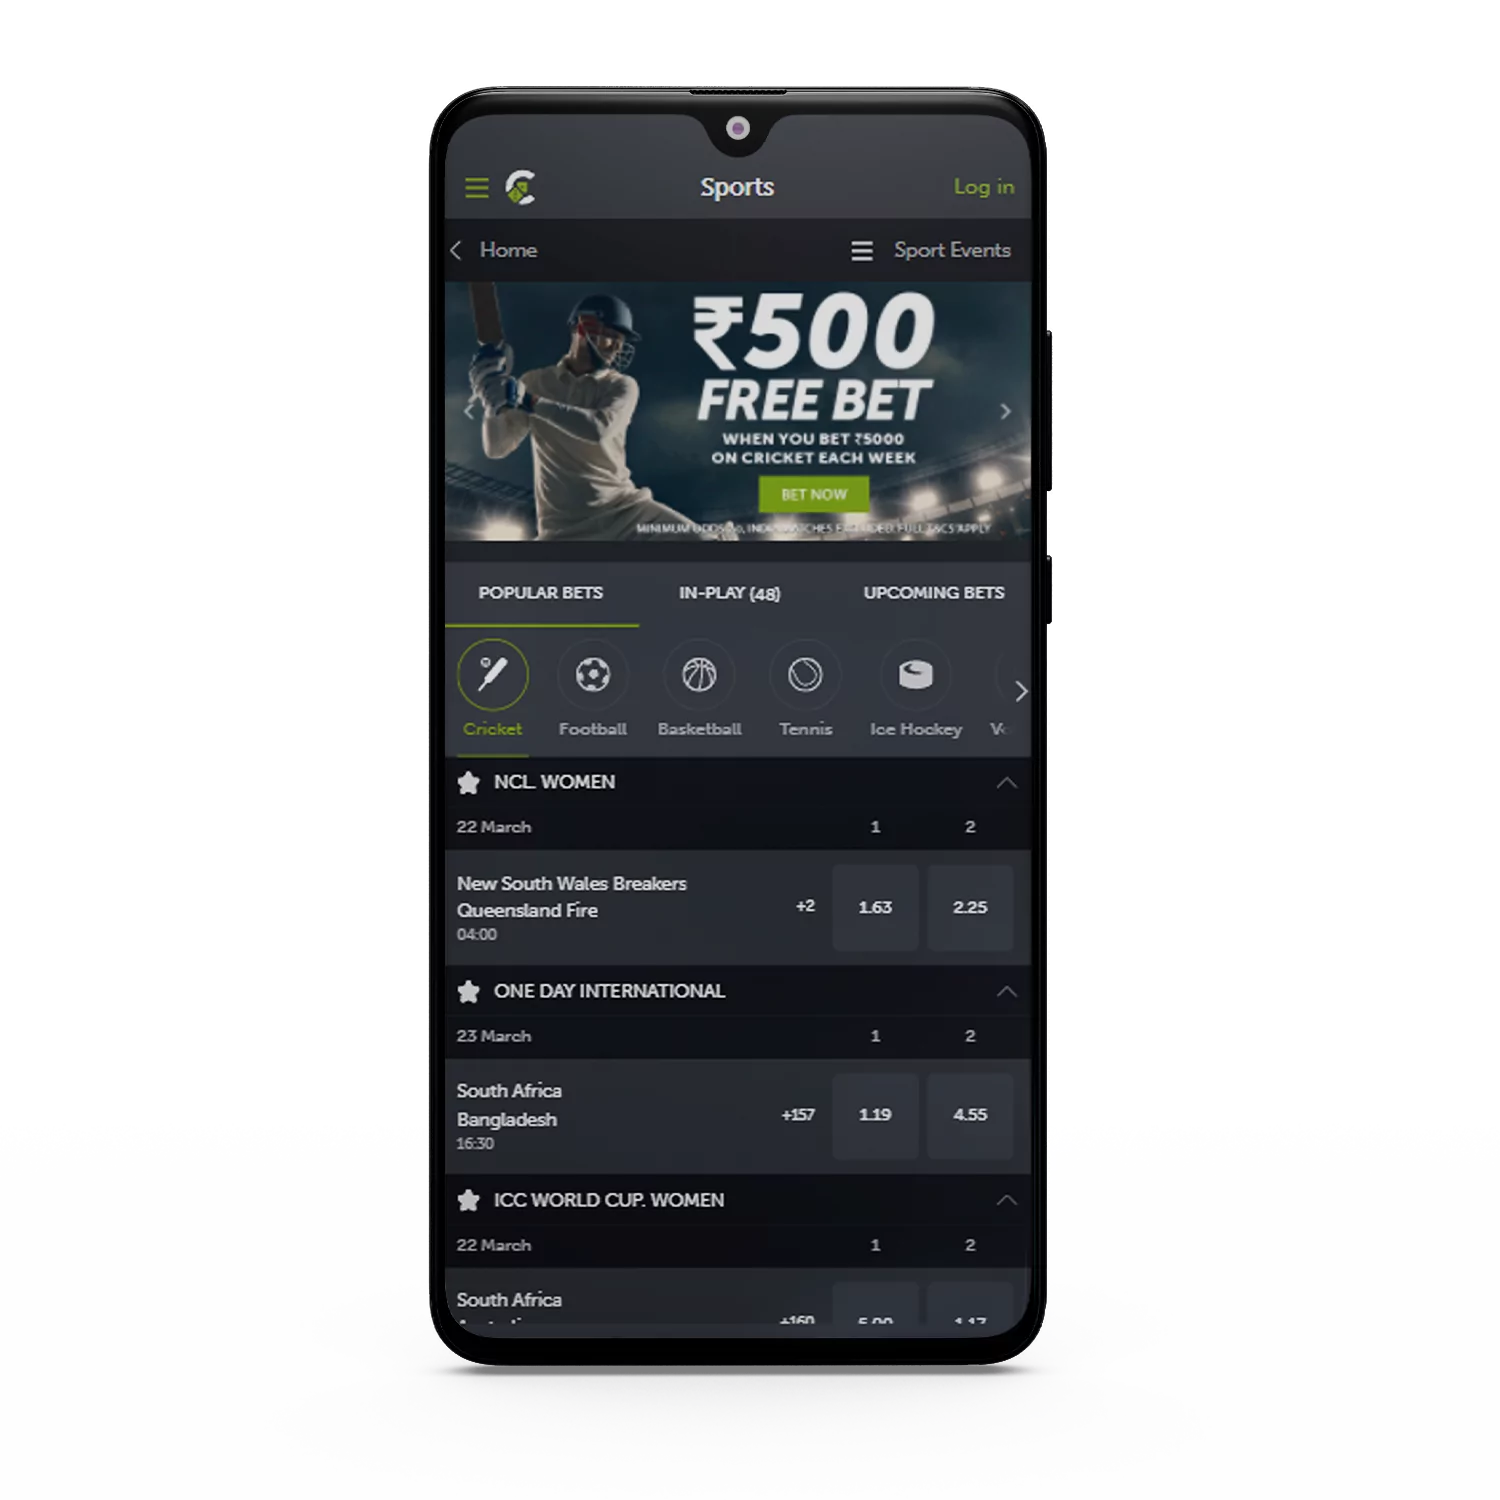 The Comeon app can be downloaded for free for cricket betting.